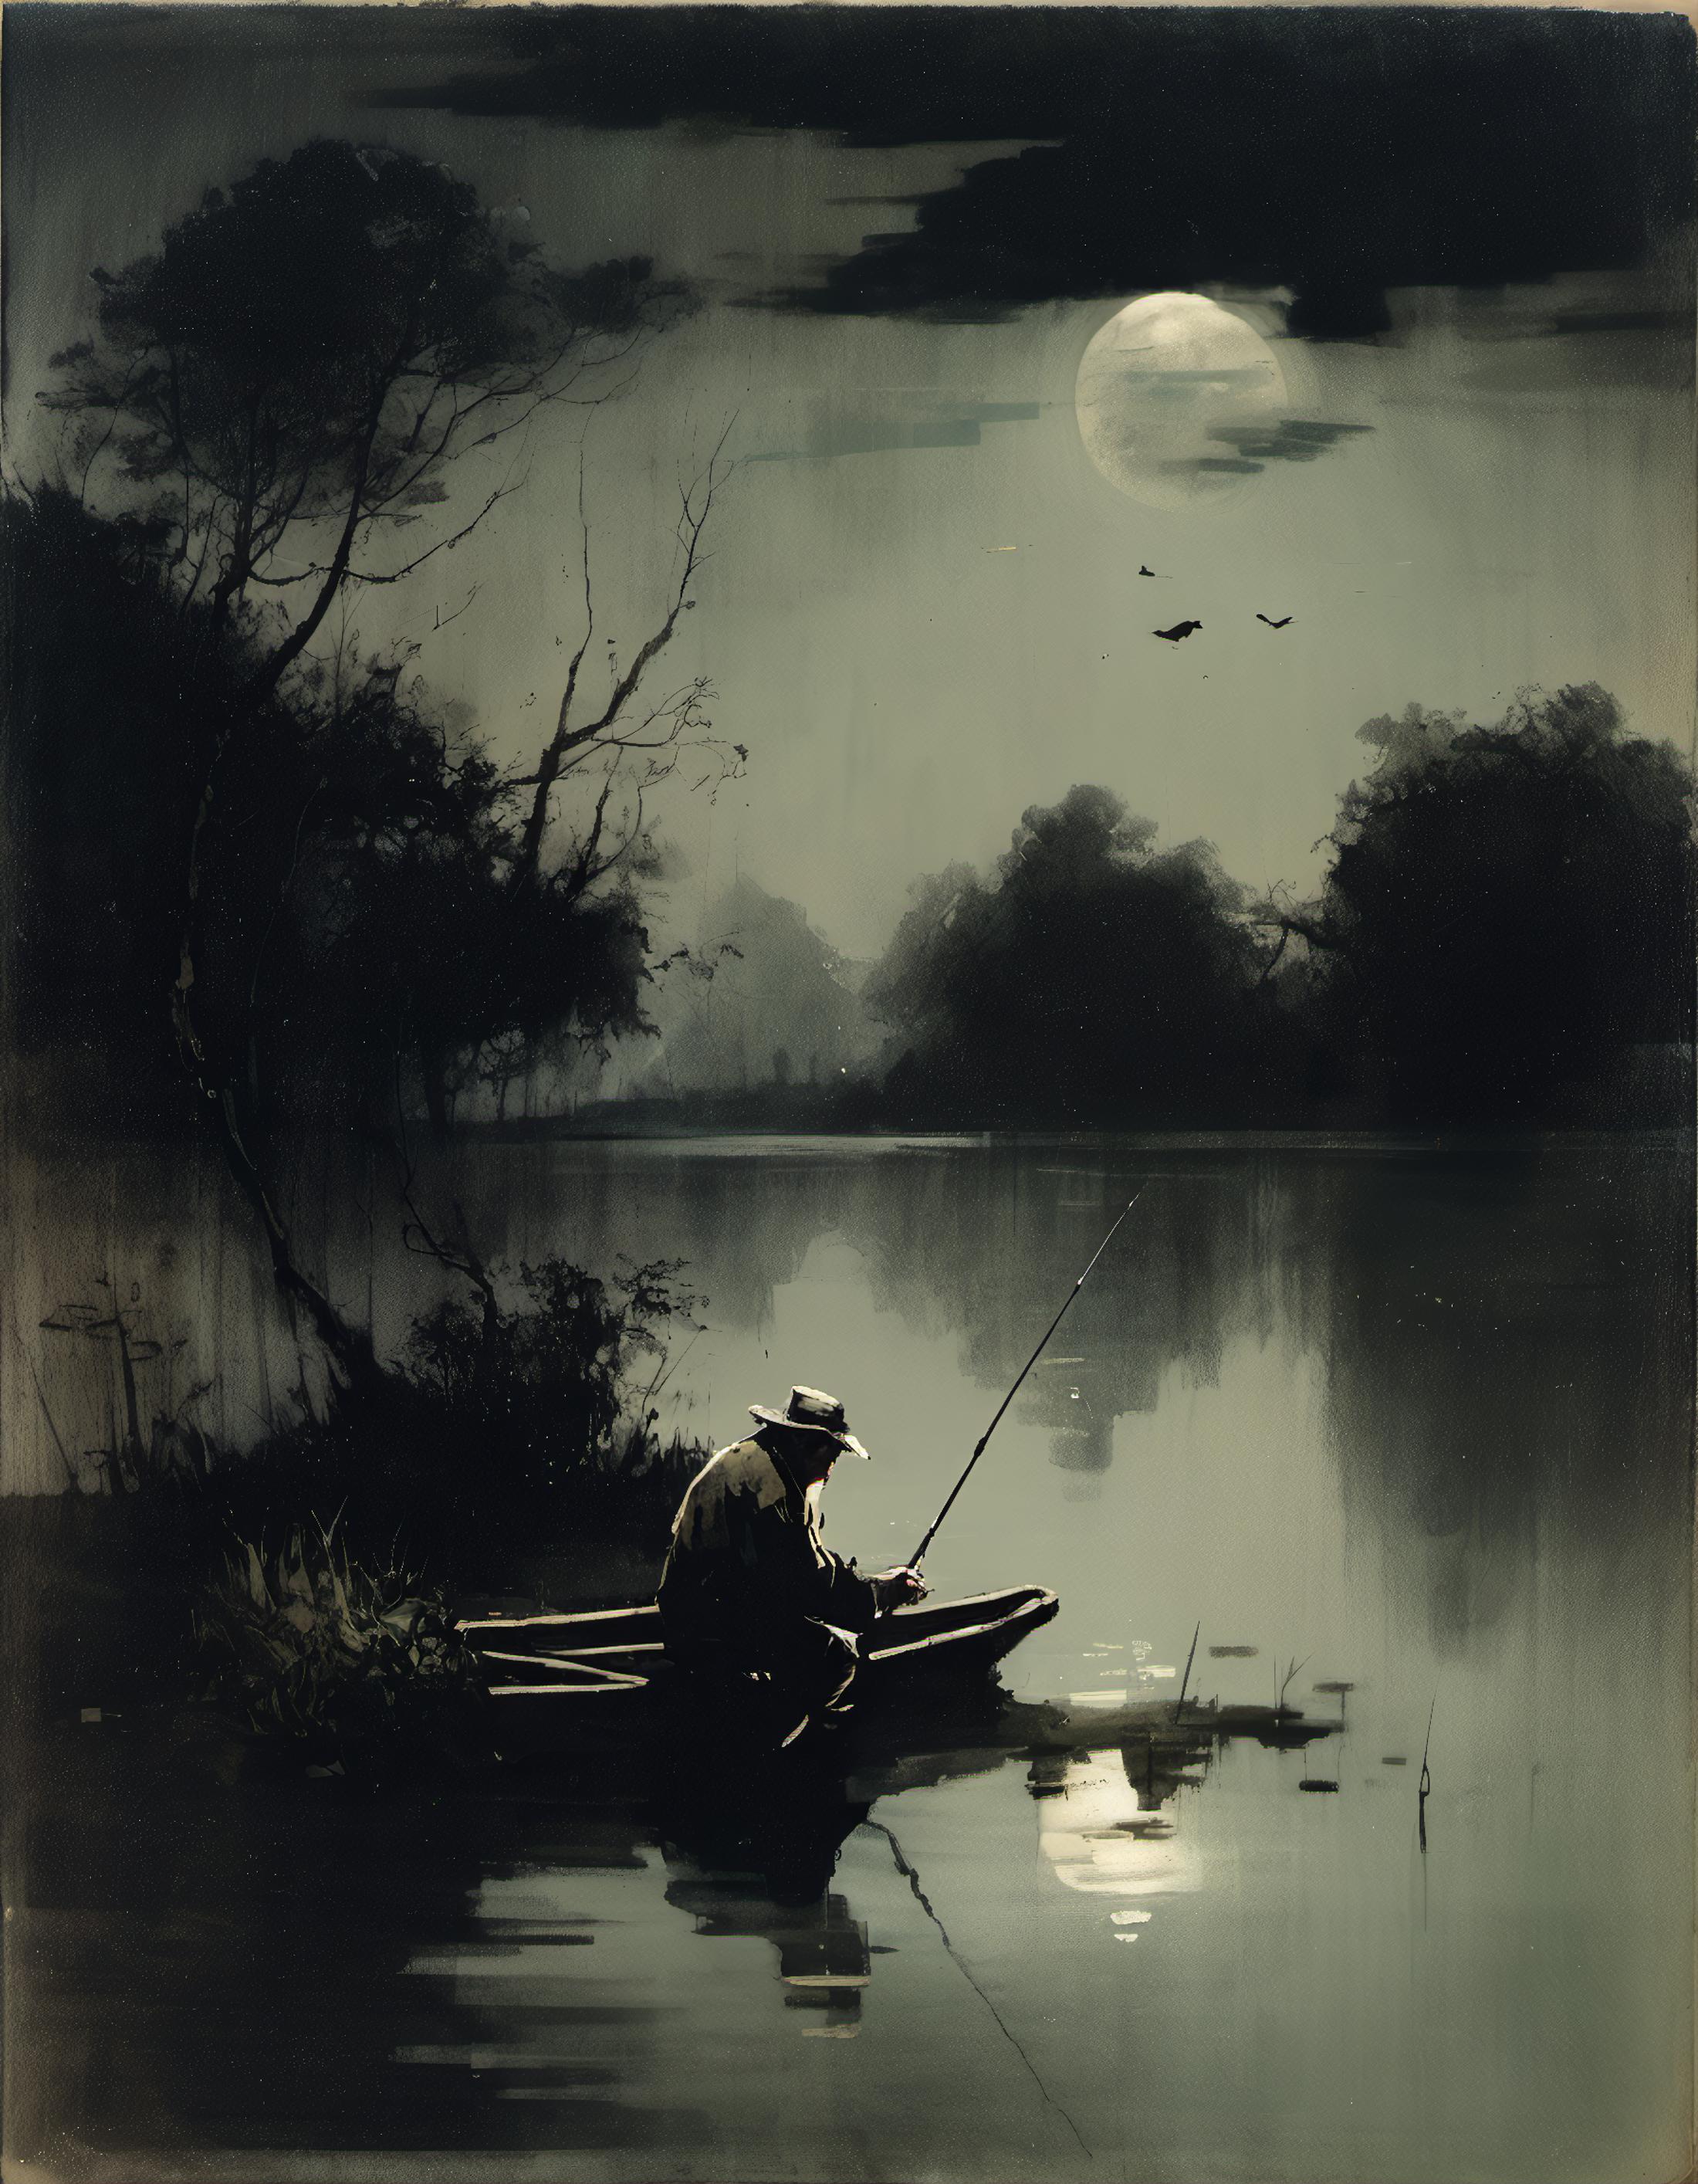 [XL]The moonlight over the lotus pond 荷塘月色 image by Standspurfahrer